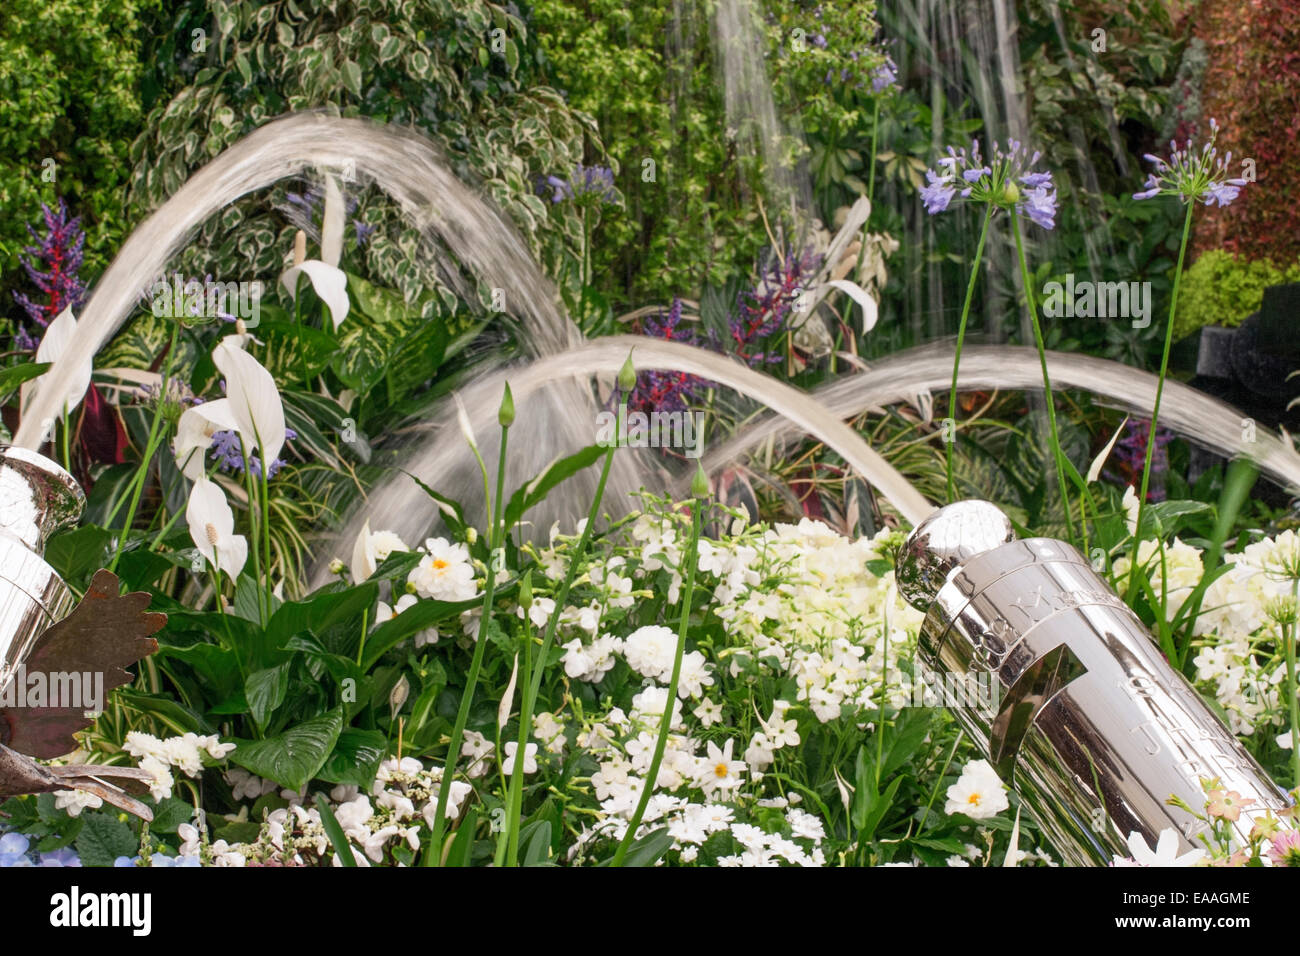 Chelsea Flower Show 2014. Water cannons part of an indoor plant display Stock Photo